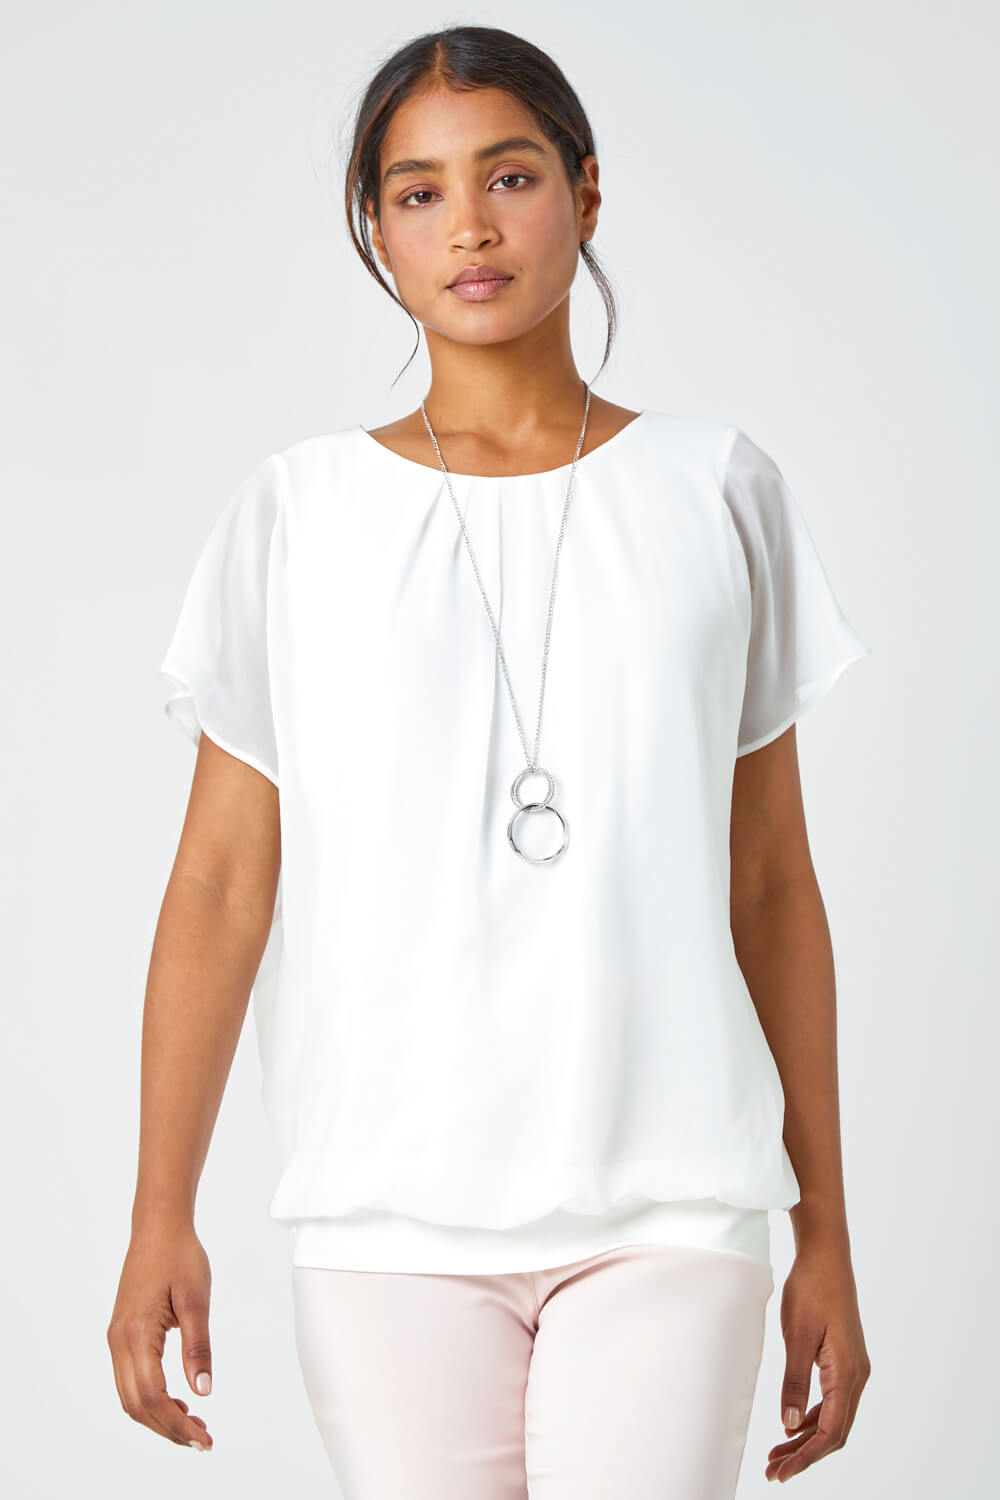 Ivory  Chiffon Jersey Blouson Top with Necklace, Image 2 of 5